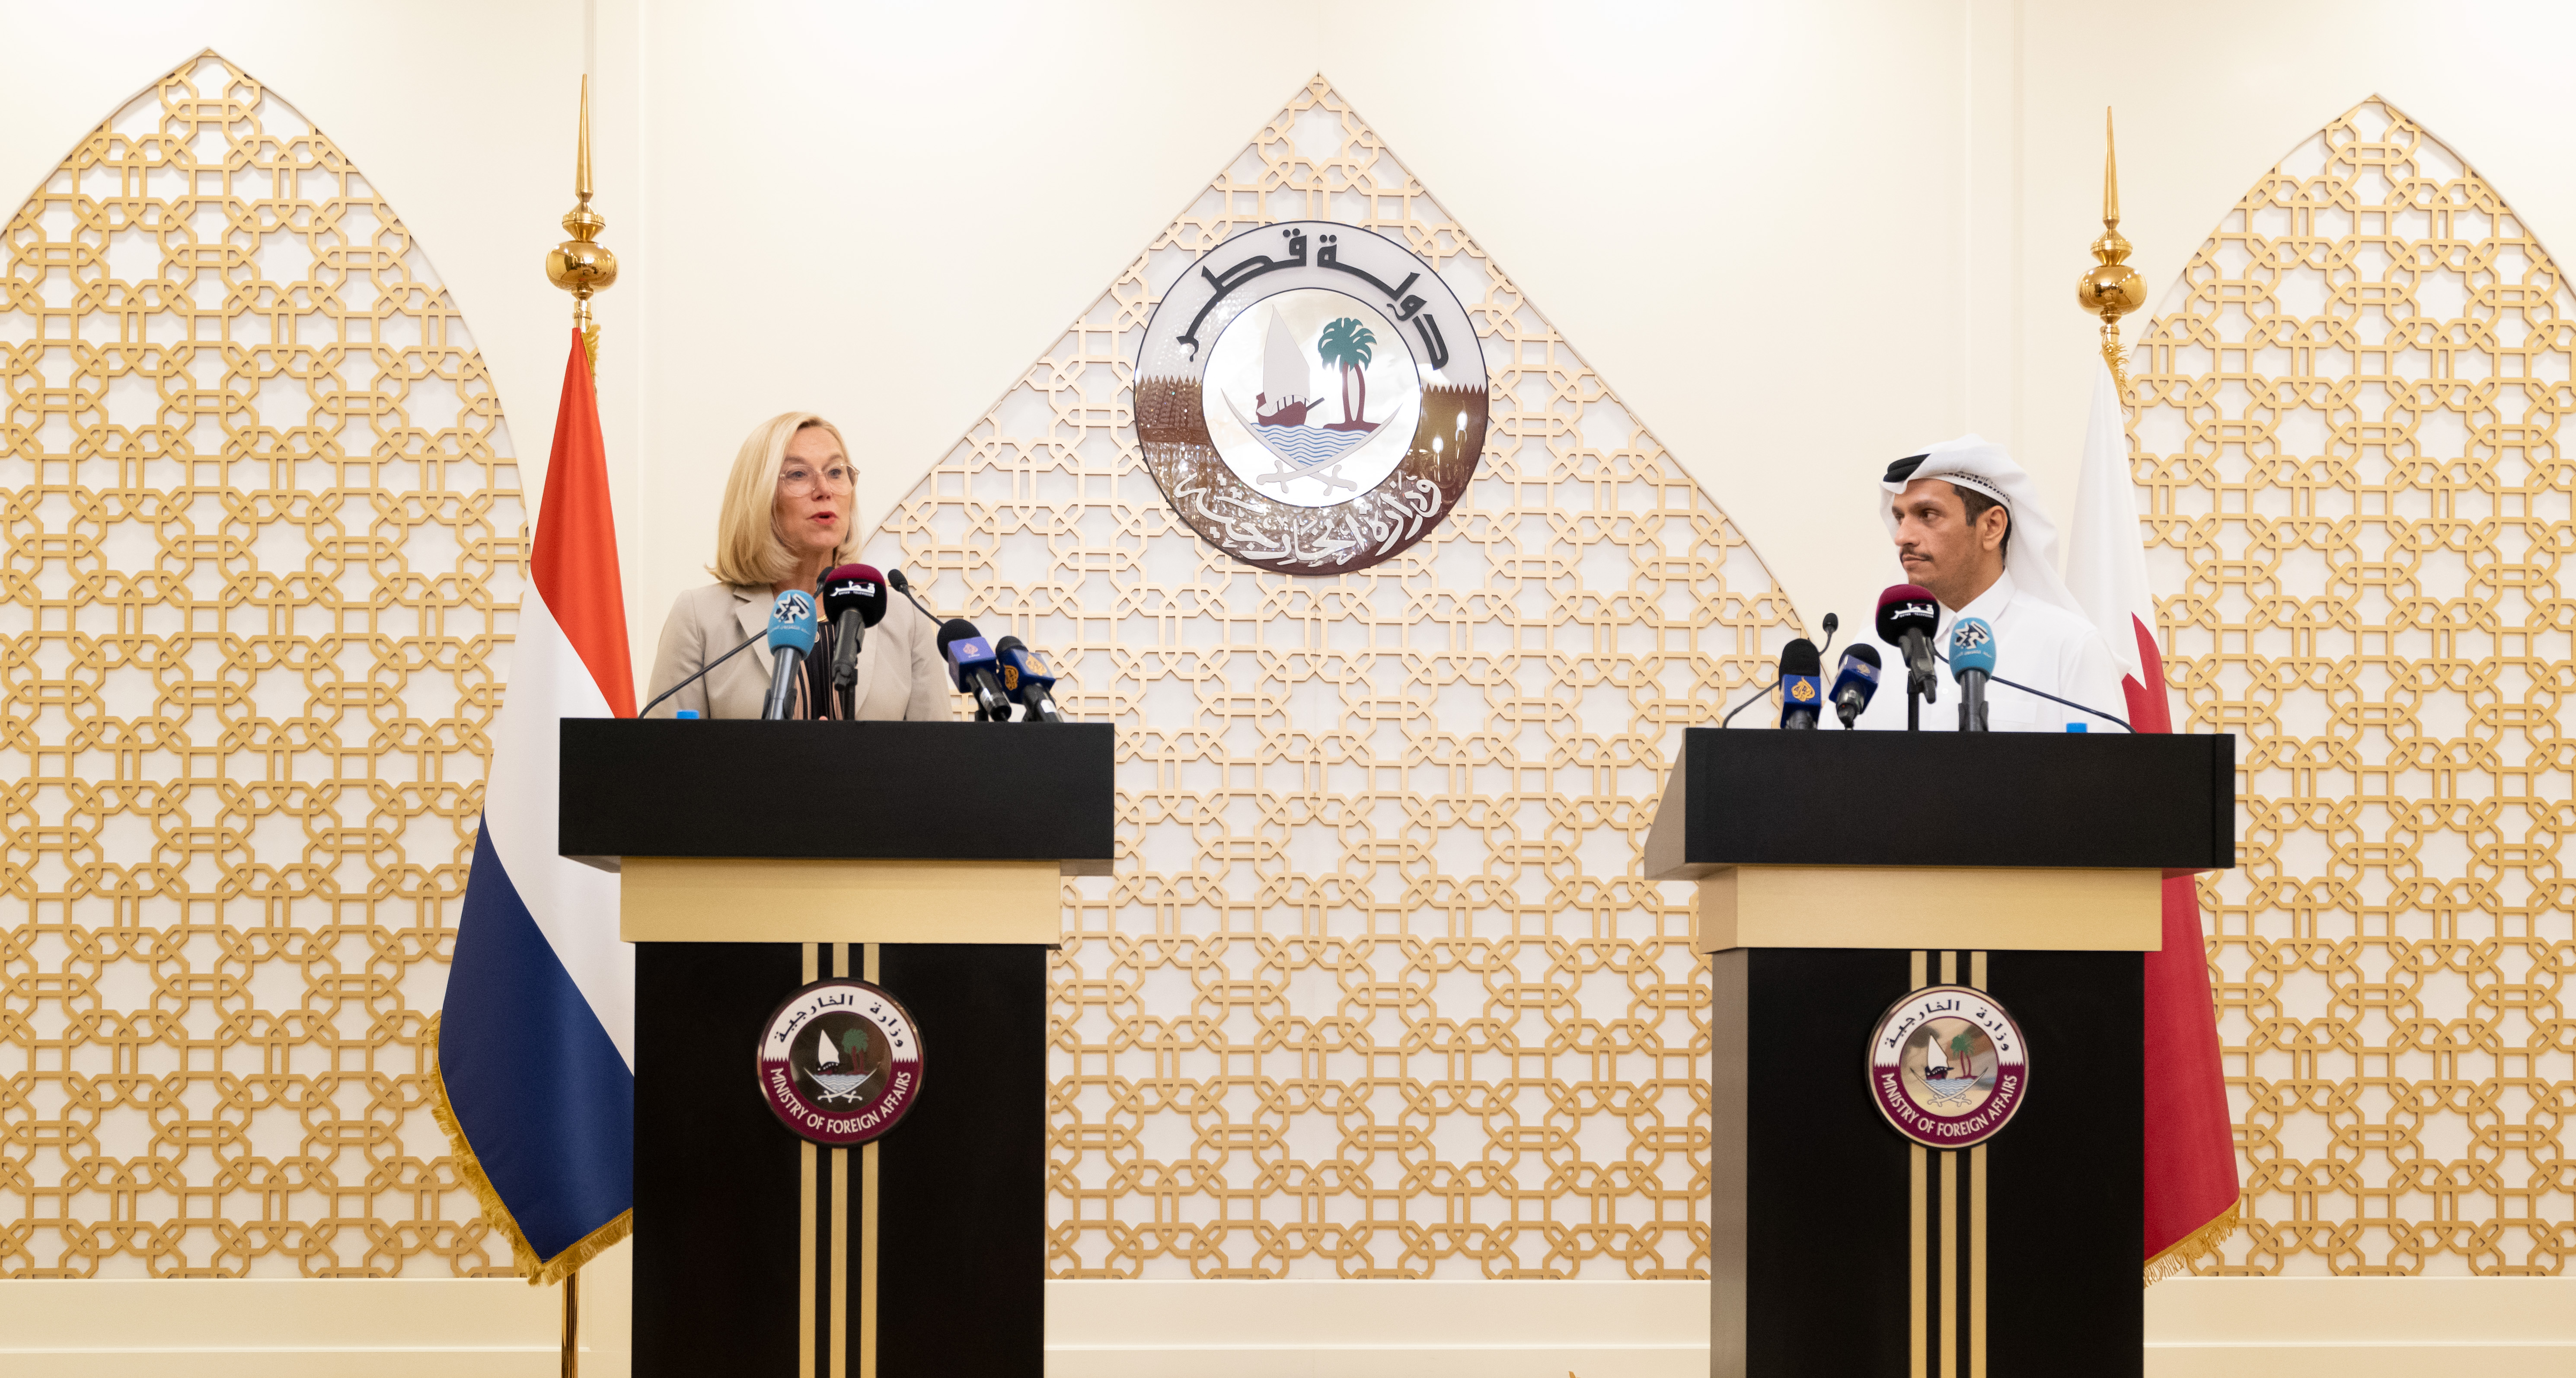 The Deputy Prime Minister and Minister of Foreign Affairs Says Qatar Looks Forward to a Peaceful Transition in Afghanistan